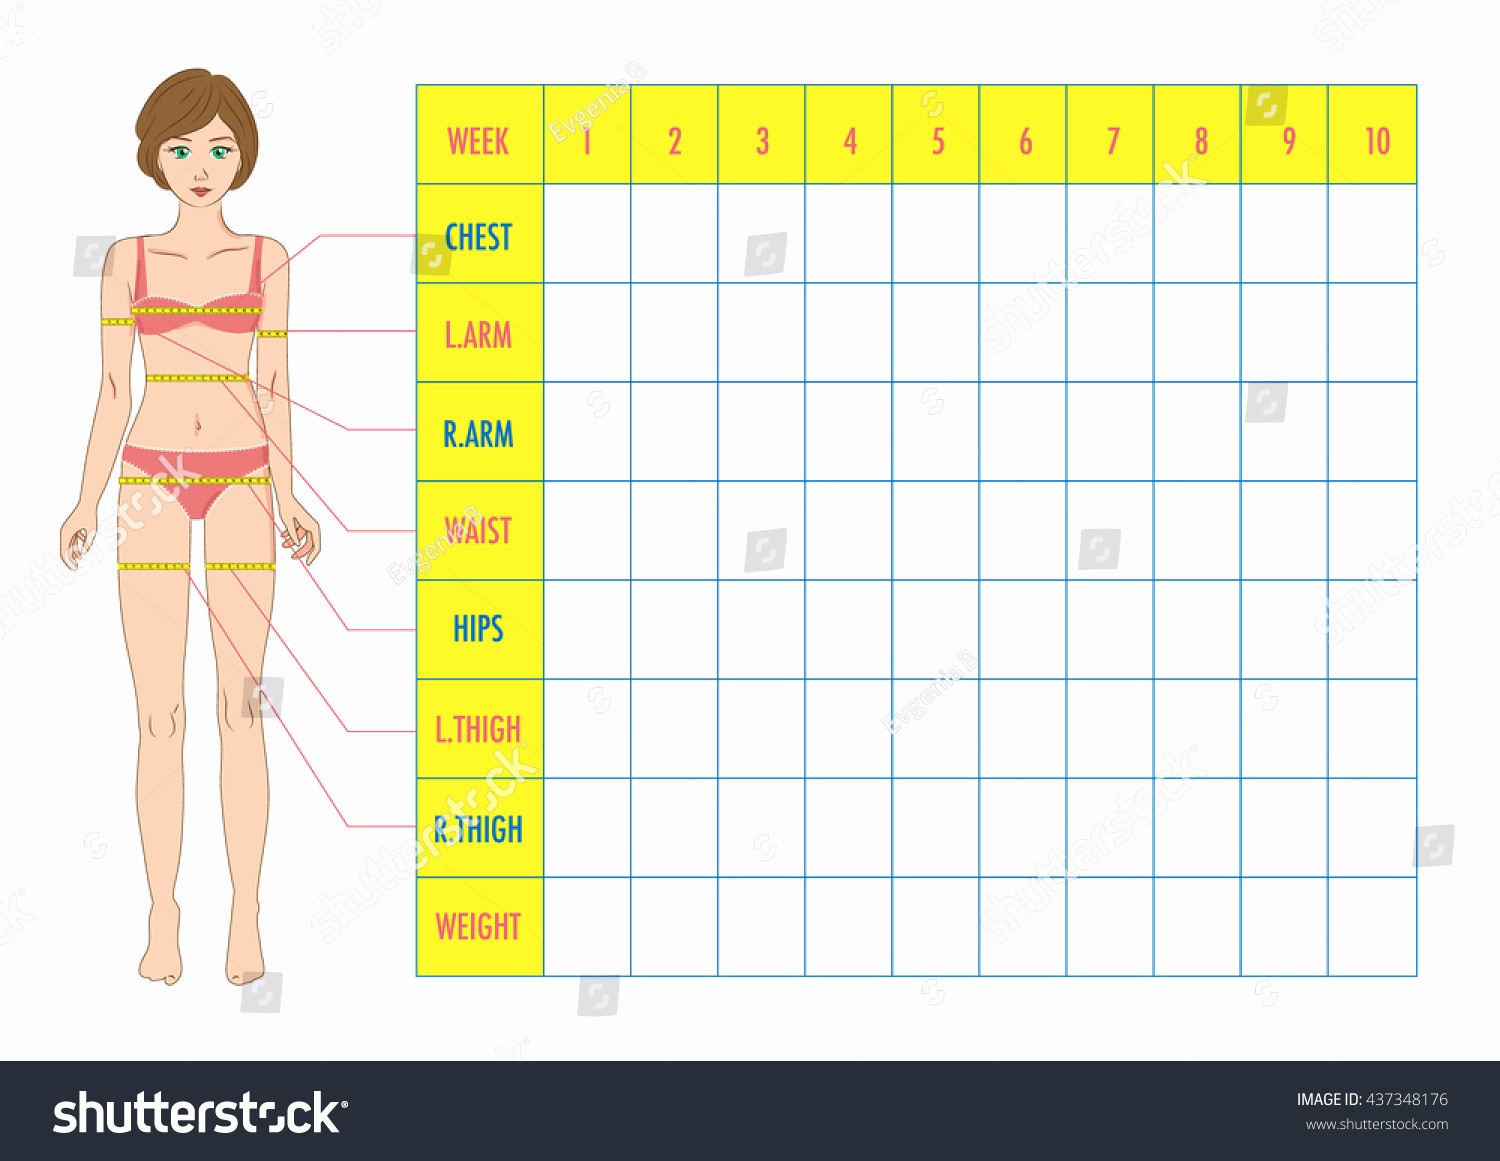 Printable Weight Loss Measurement Chart Awesome Measurement Chart Body Parameters Sport Diet Stock Vector